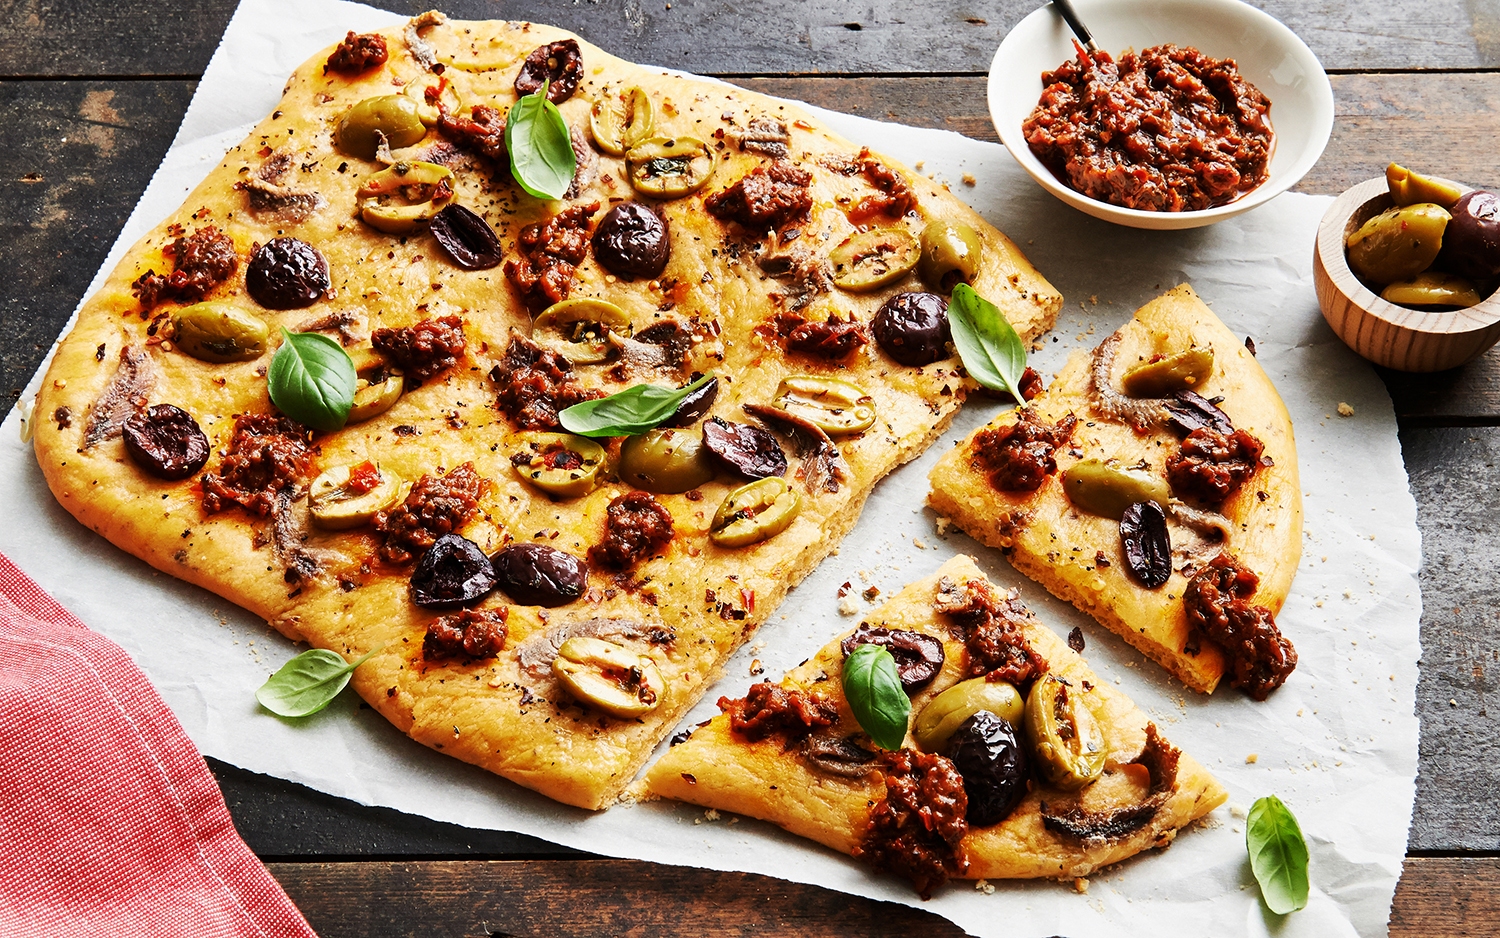 Sundried-Tomato-Pizza-with-Anchovies-and-Olives-L-2280-R1.jpg